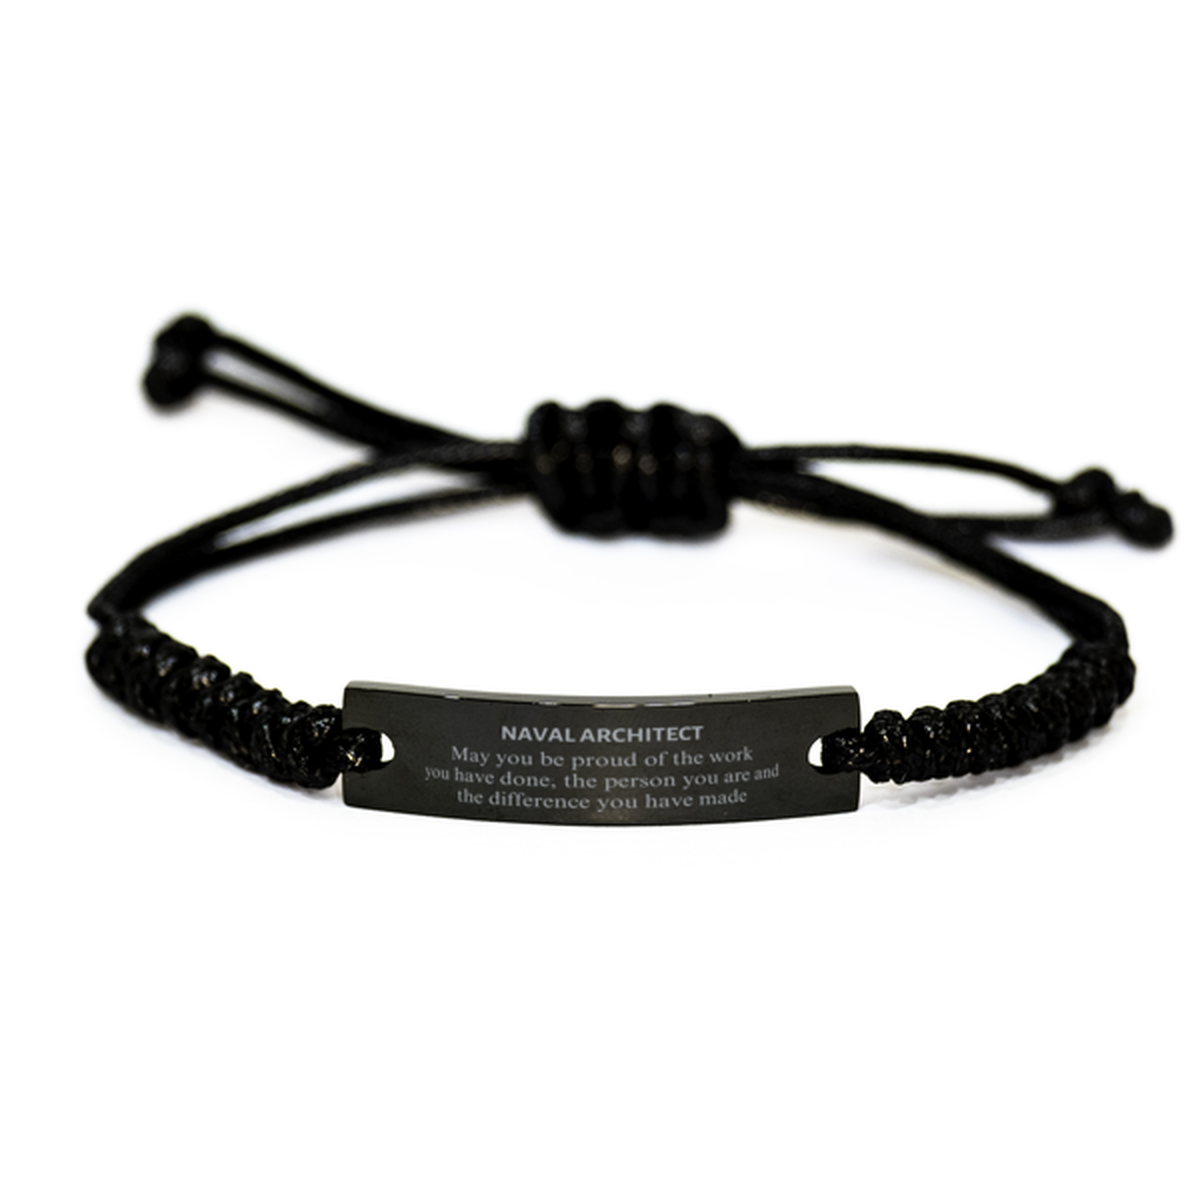 Naval Architect May you be proud of the work you have done, Retirement Naval Architect Black Rope Bracelet for Colleague Appreciation Gifts Amazing for Naval Architect